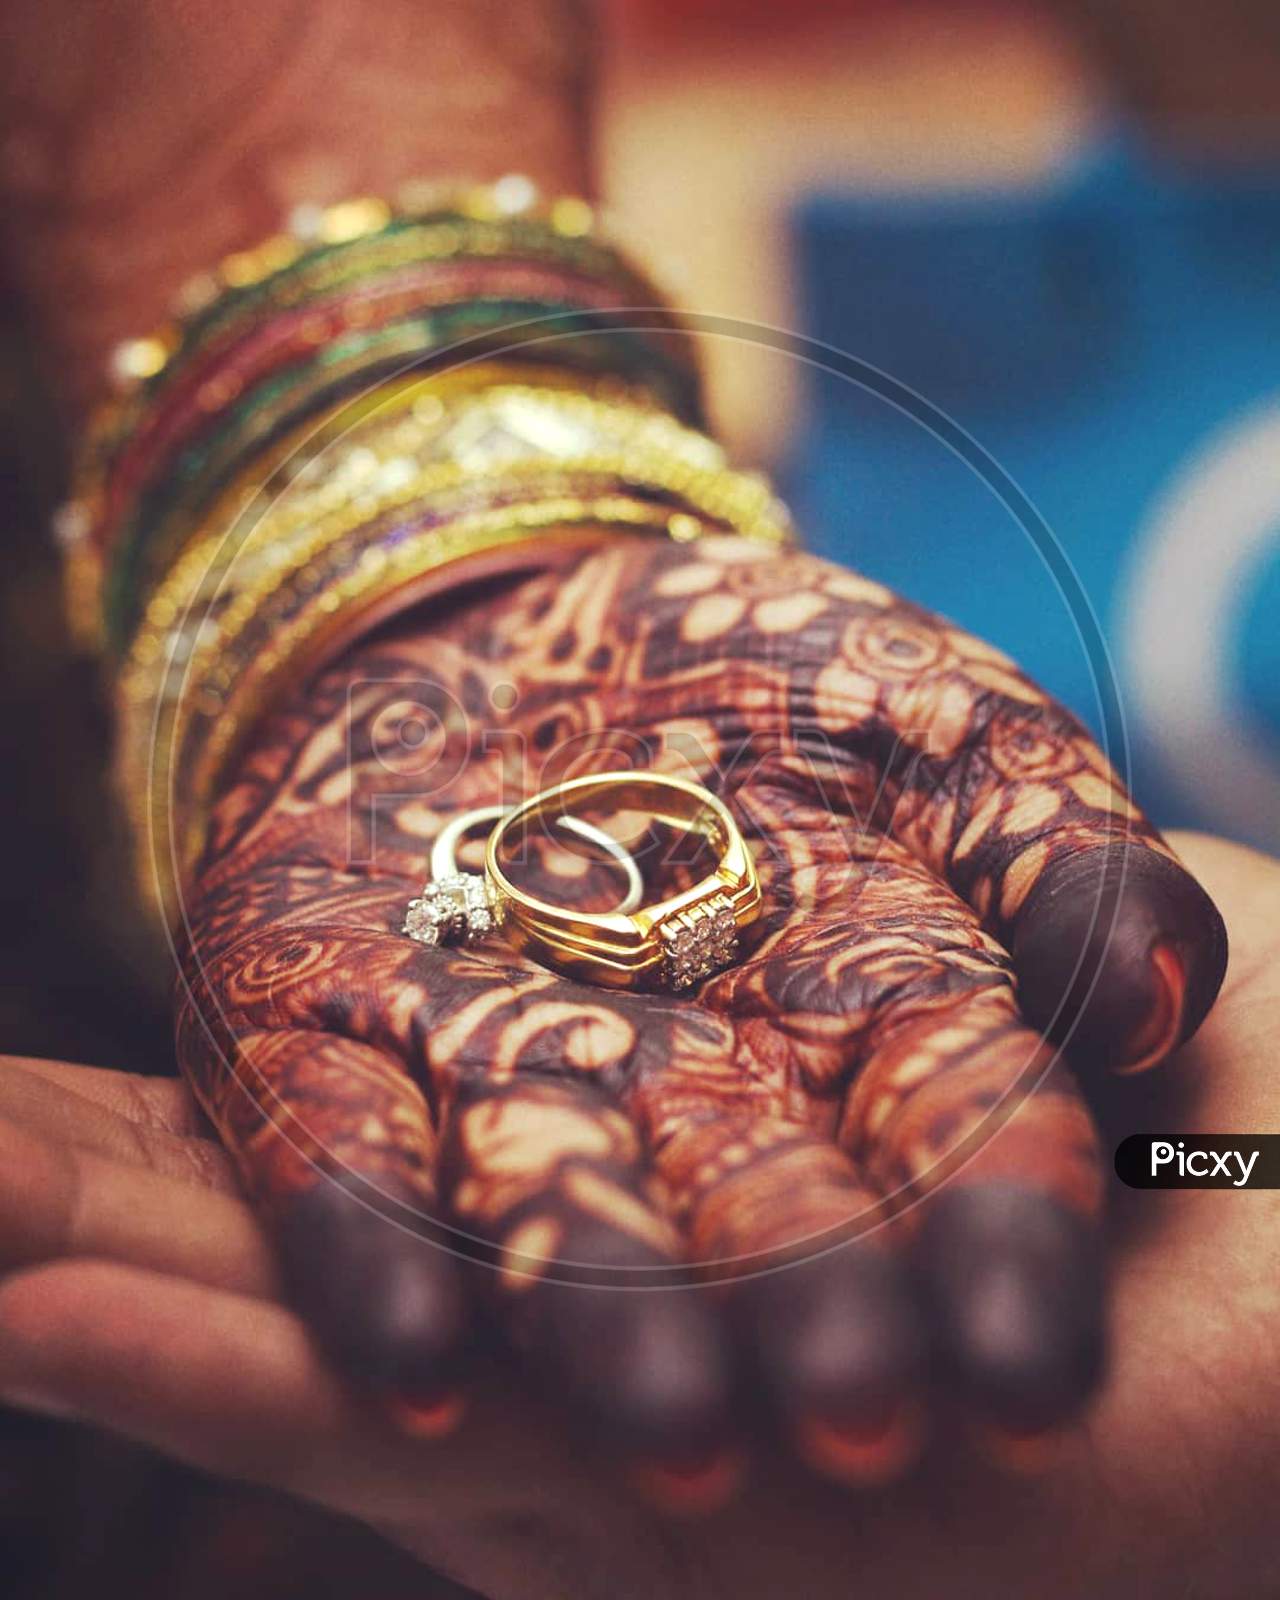 Engagement rings in hands of bride and groom